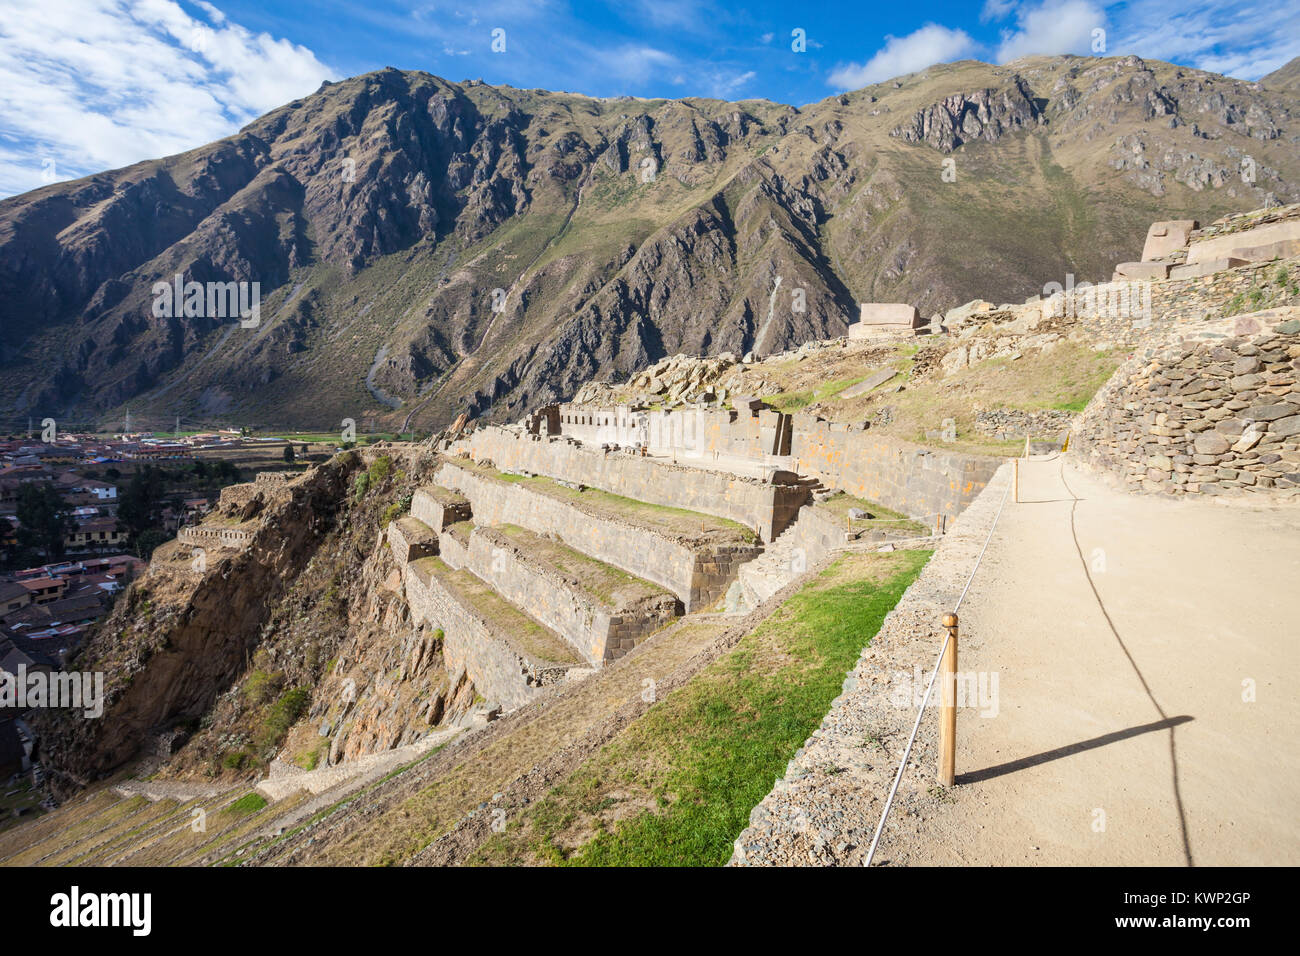 Ollantaytambo Ruins. Ollantaytambo is a town and an Inca archaeological site in southern Peru. Stock Photo